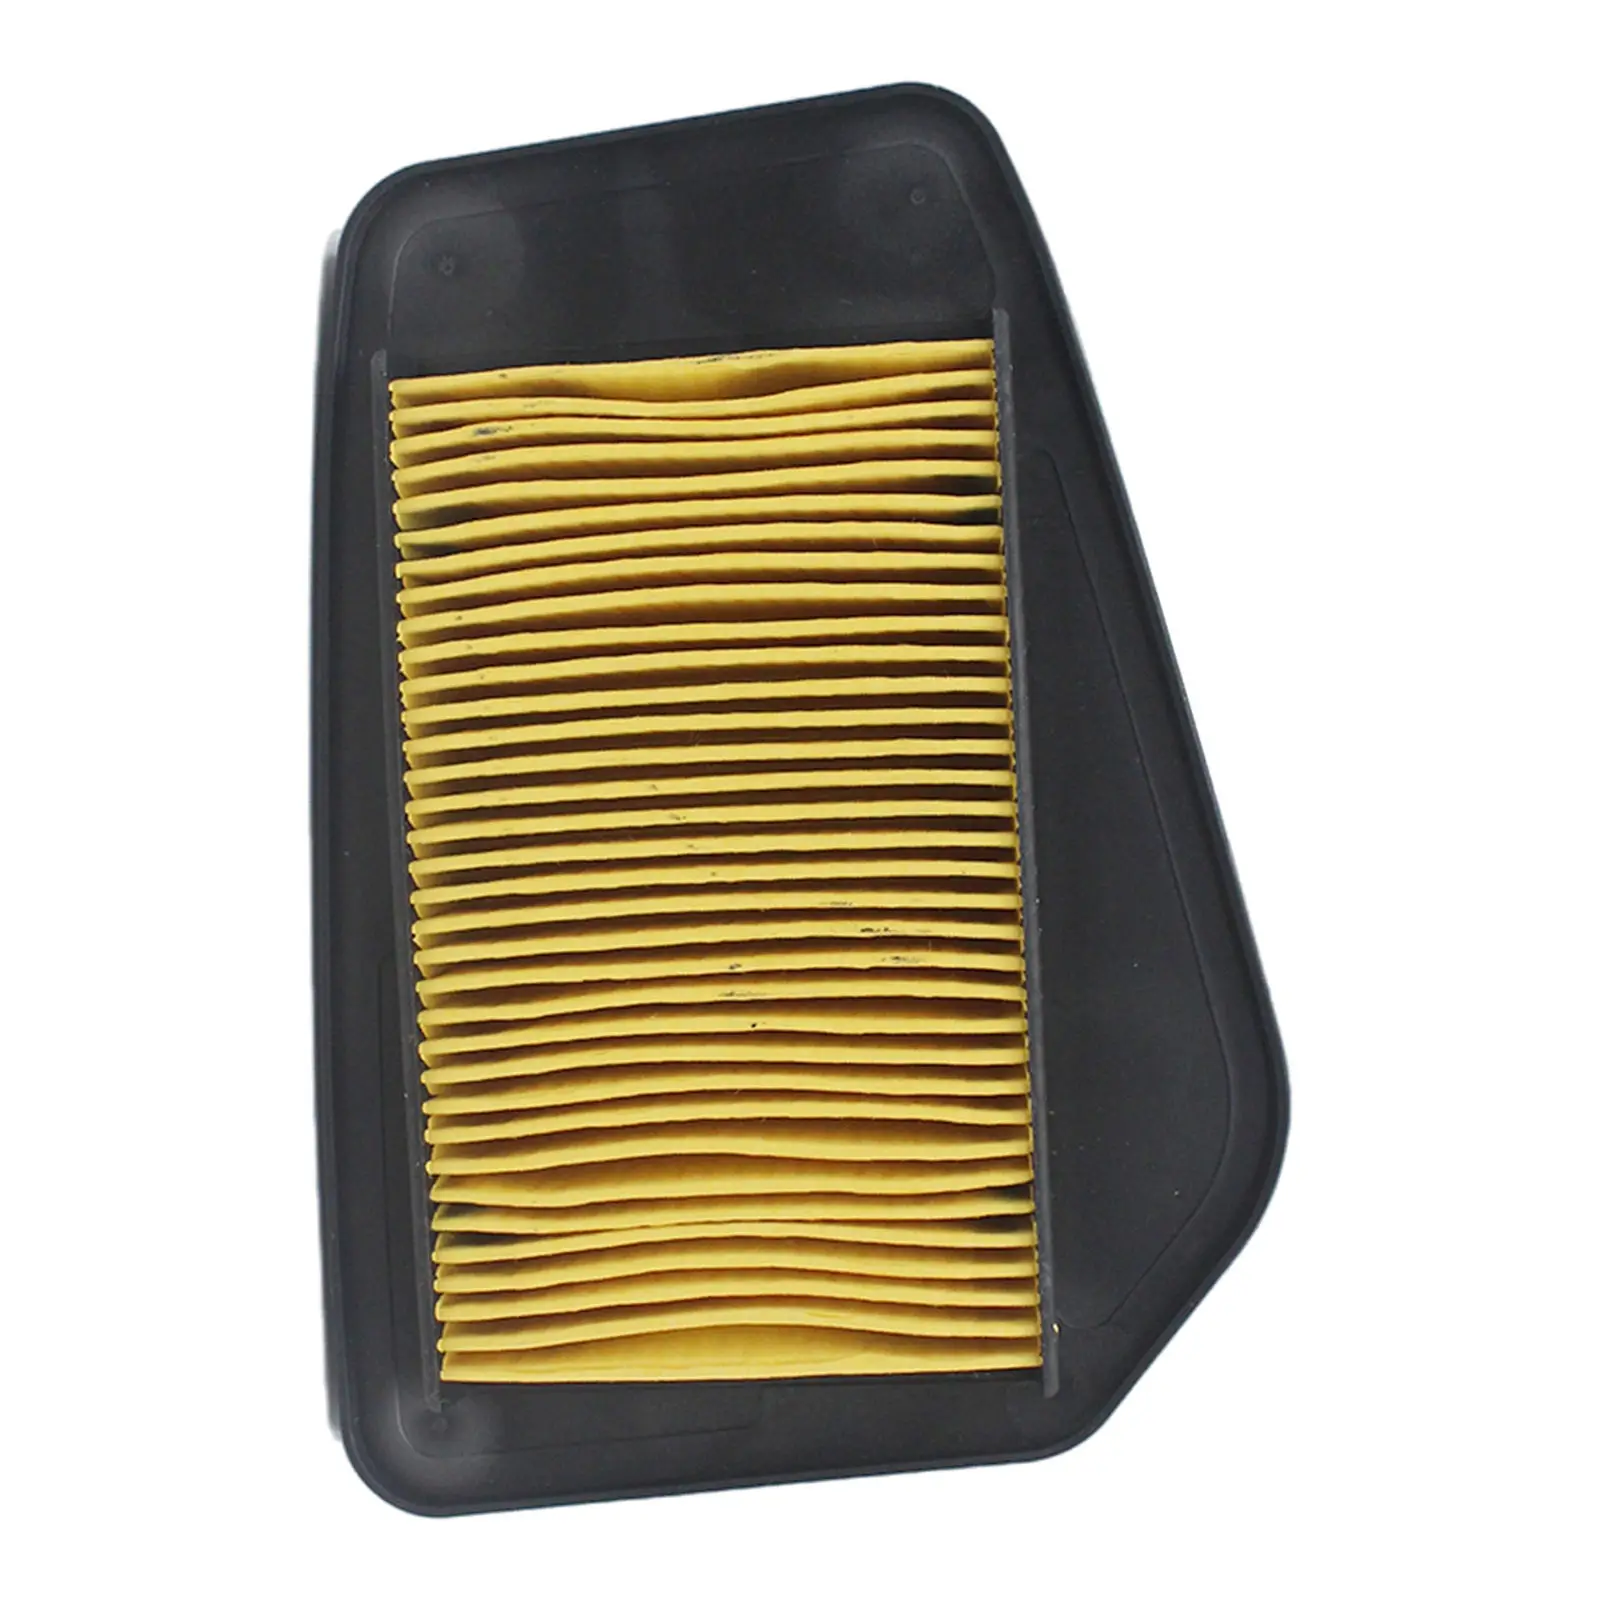 Scooter Air Filter Replacement for Honda CBR125 CBR 125 2004-2010